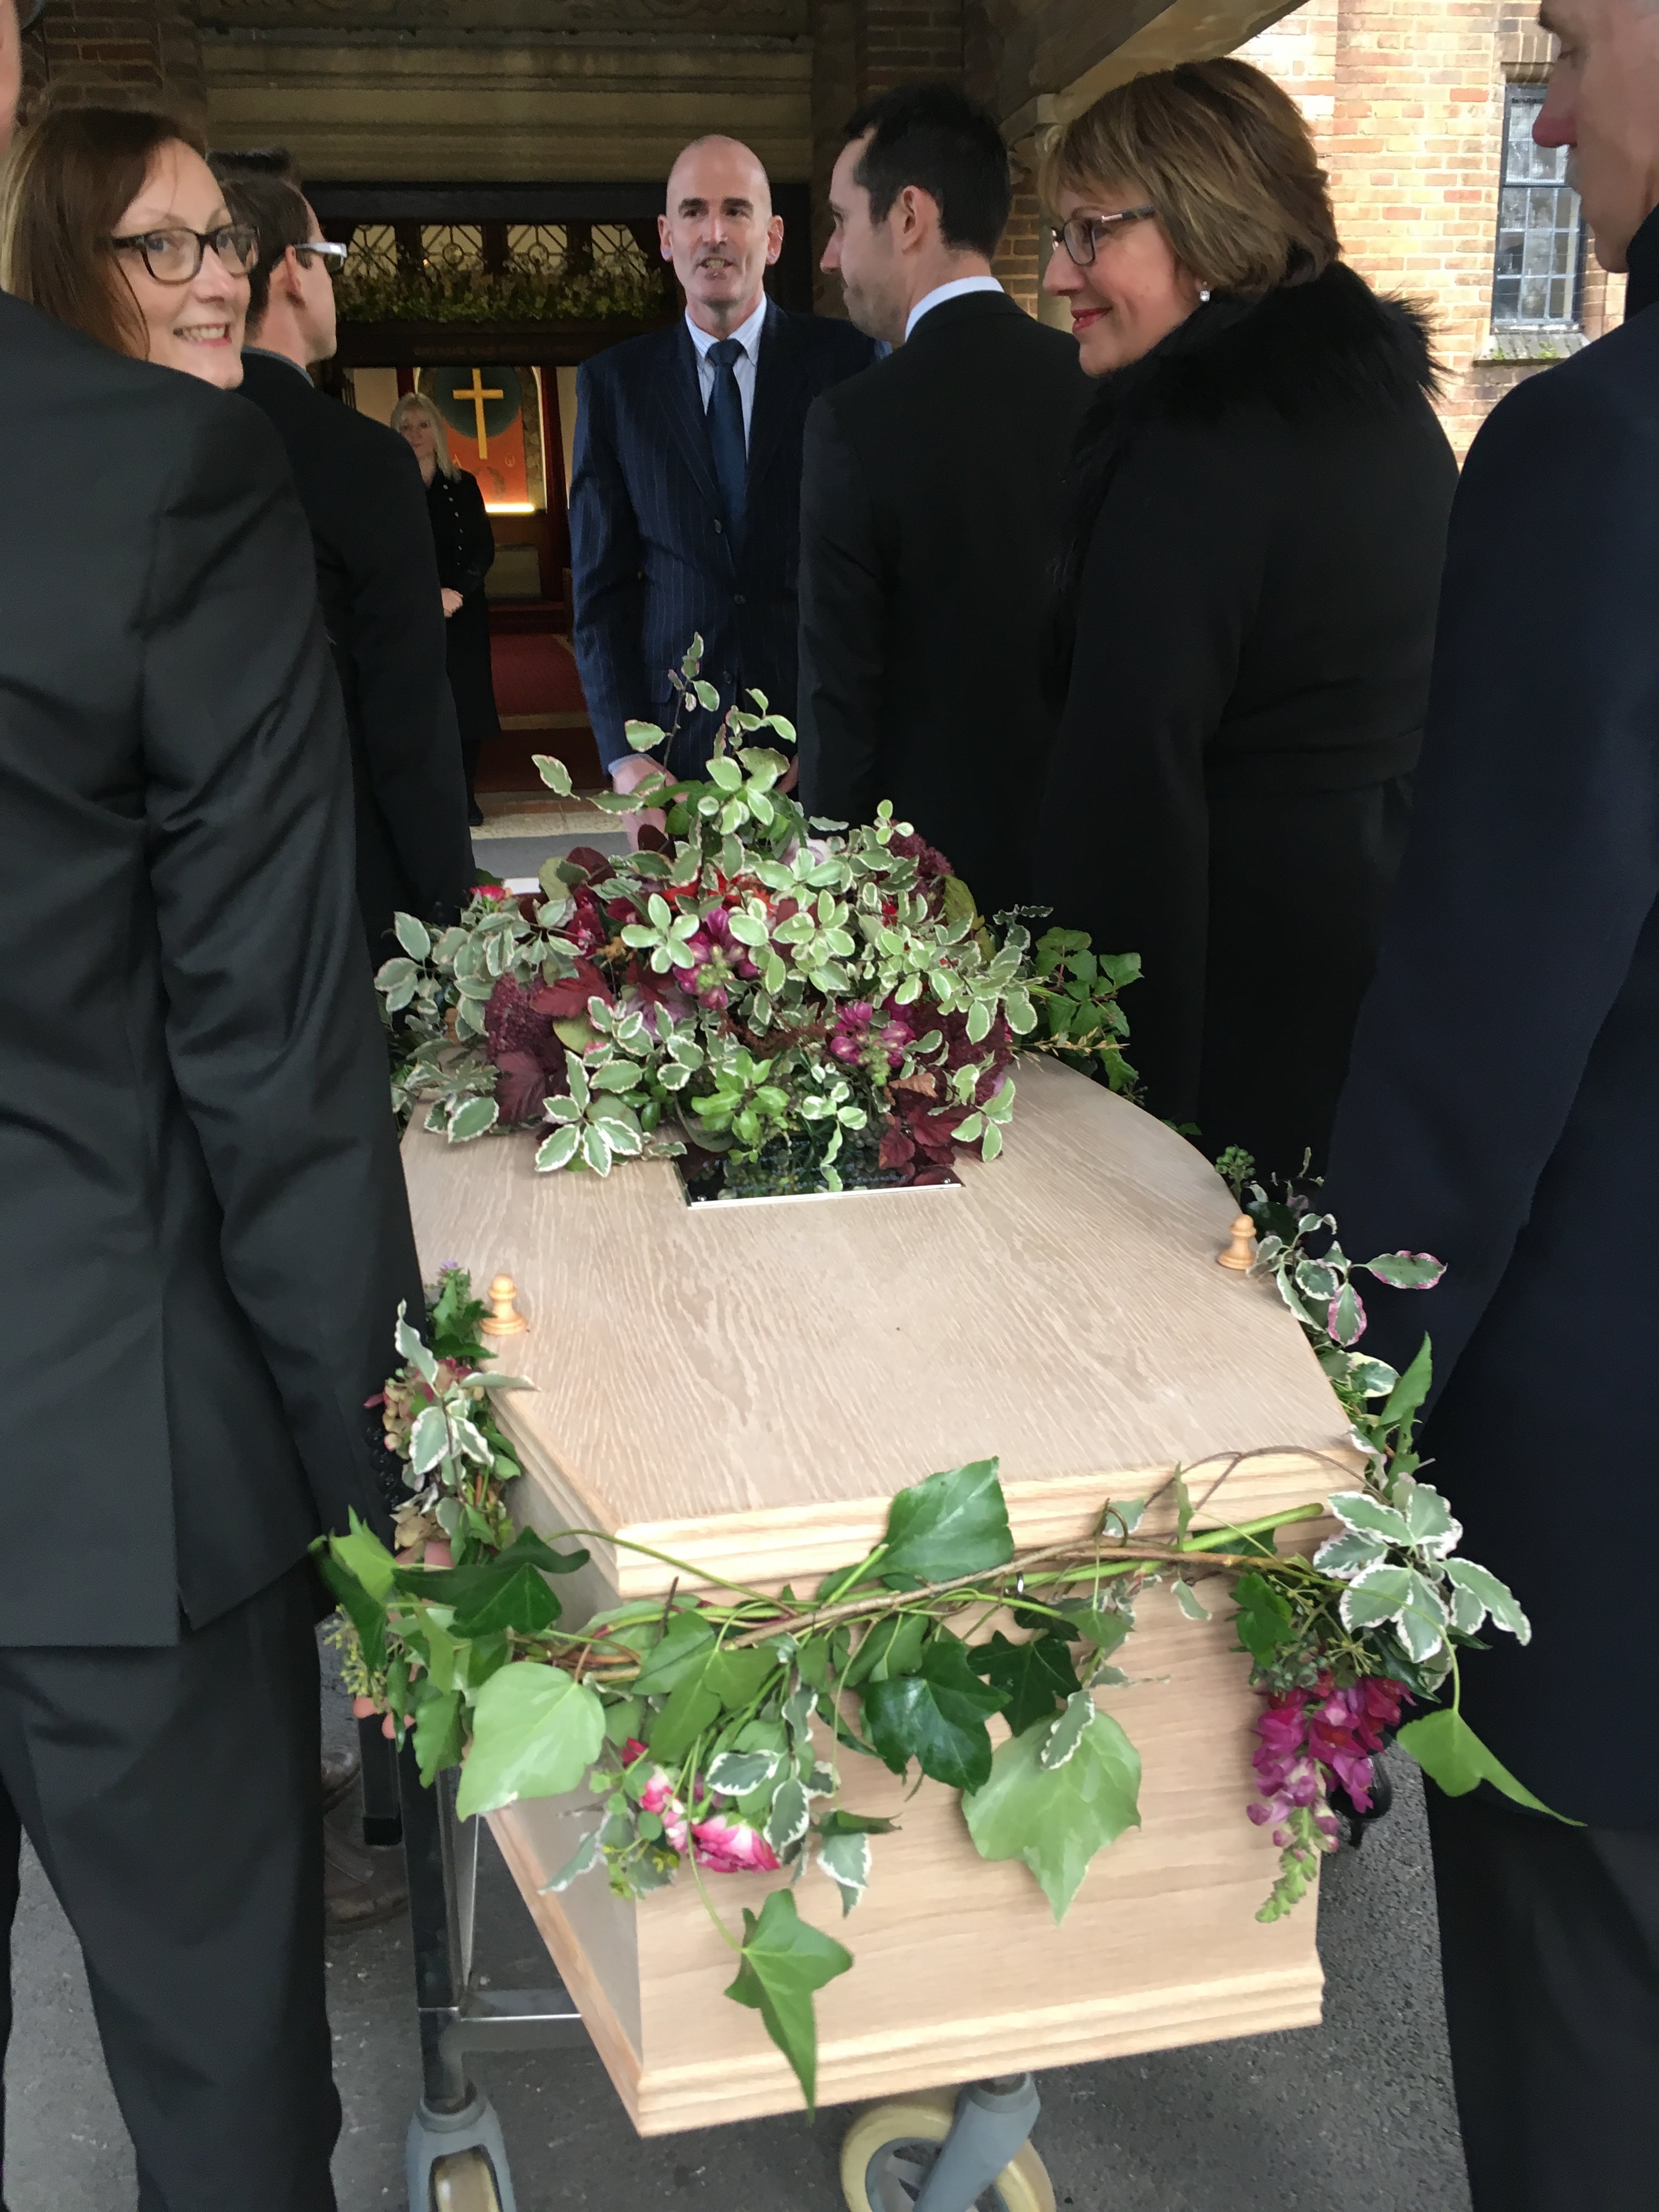 The funeral industry is being investigated by the Government